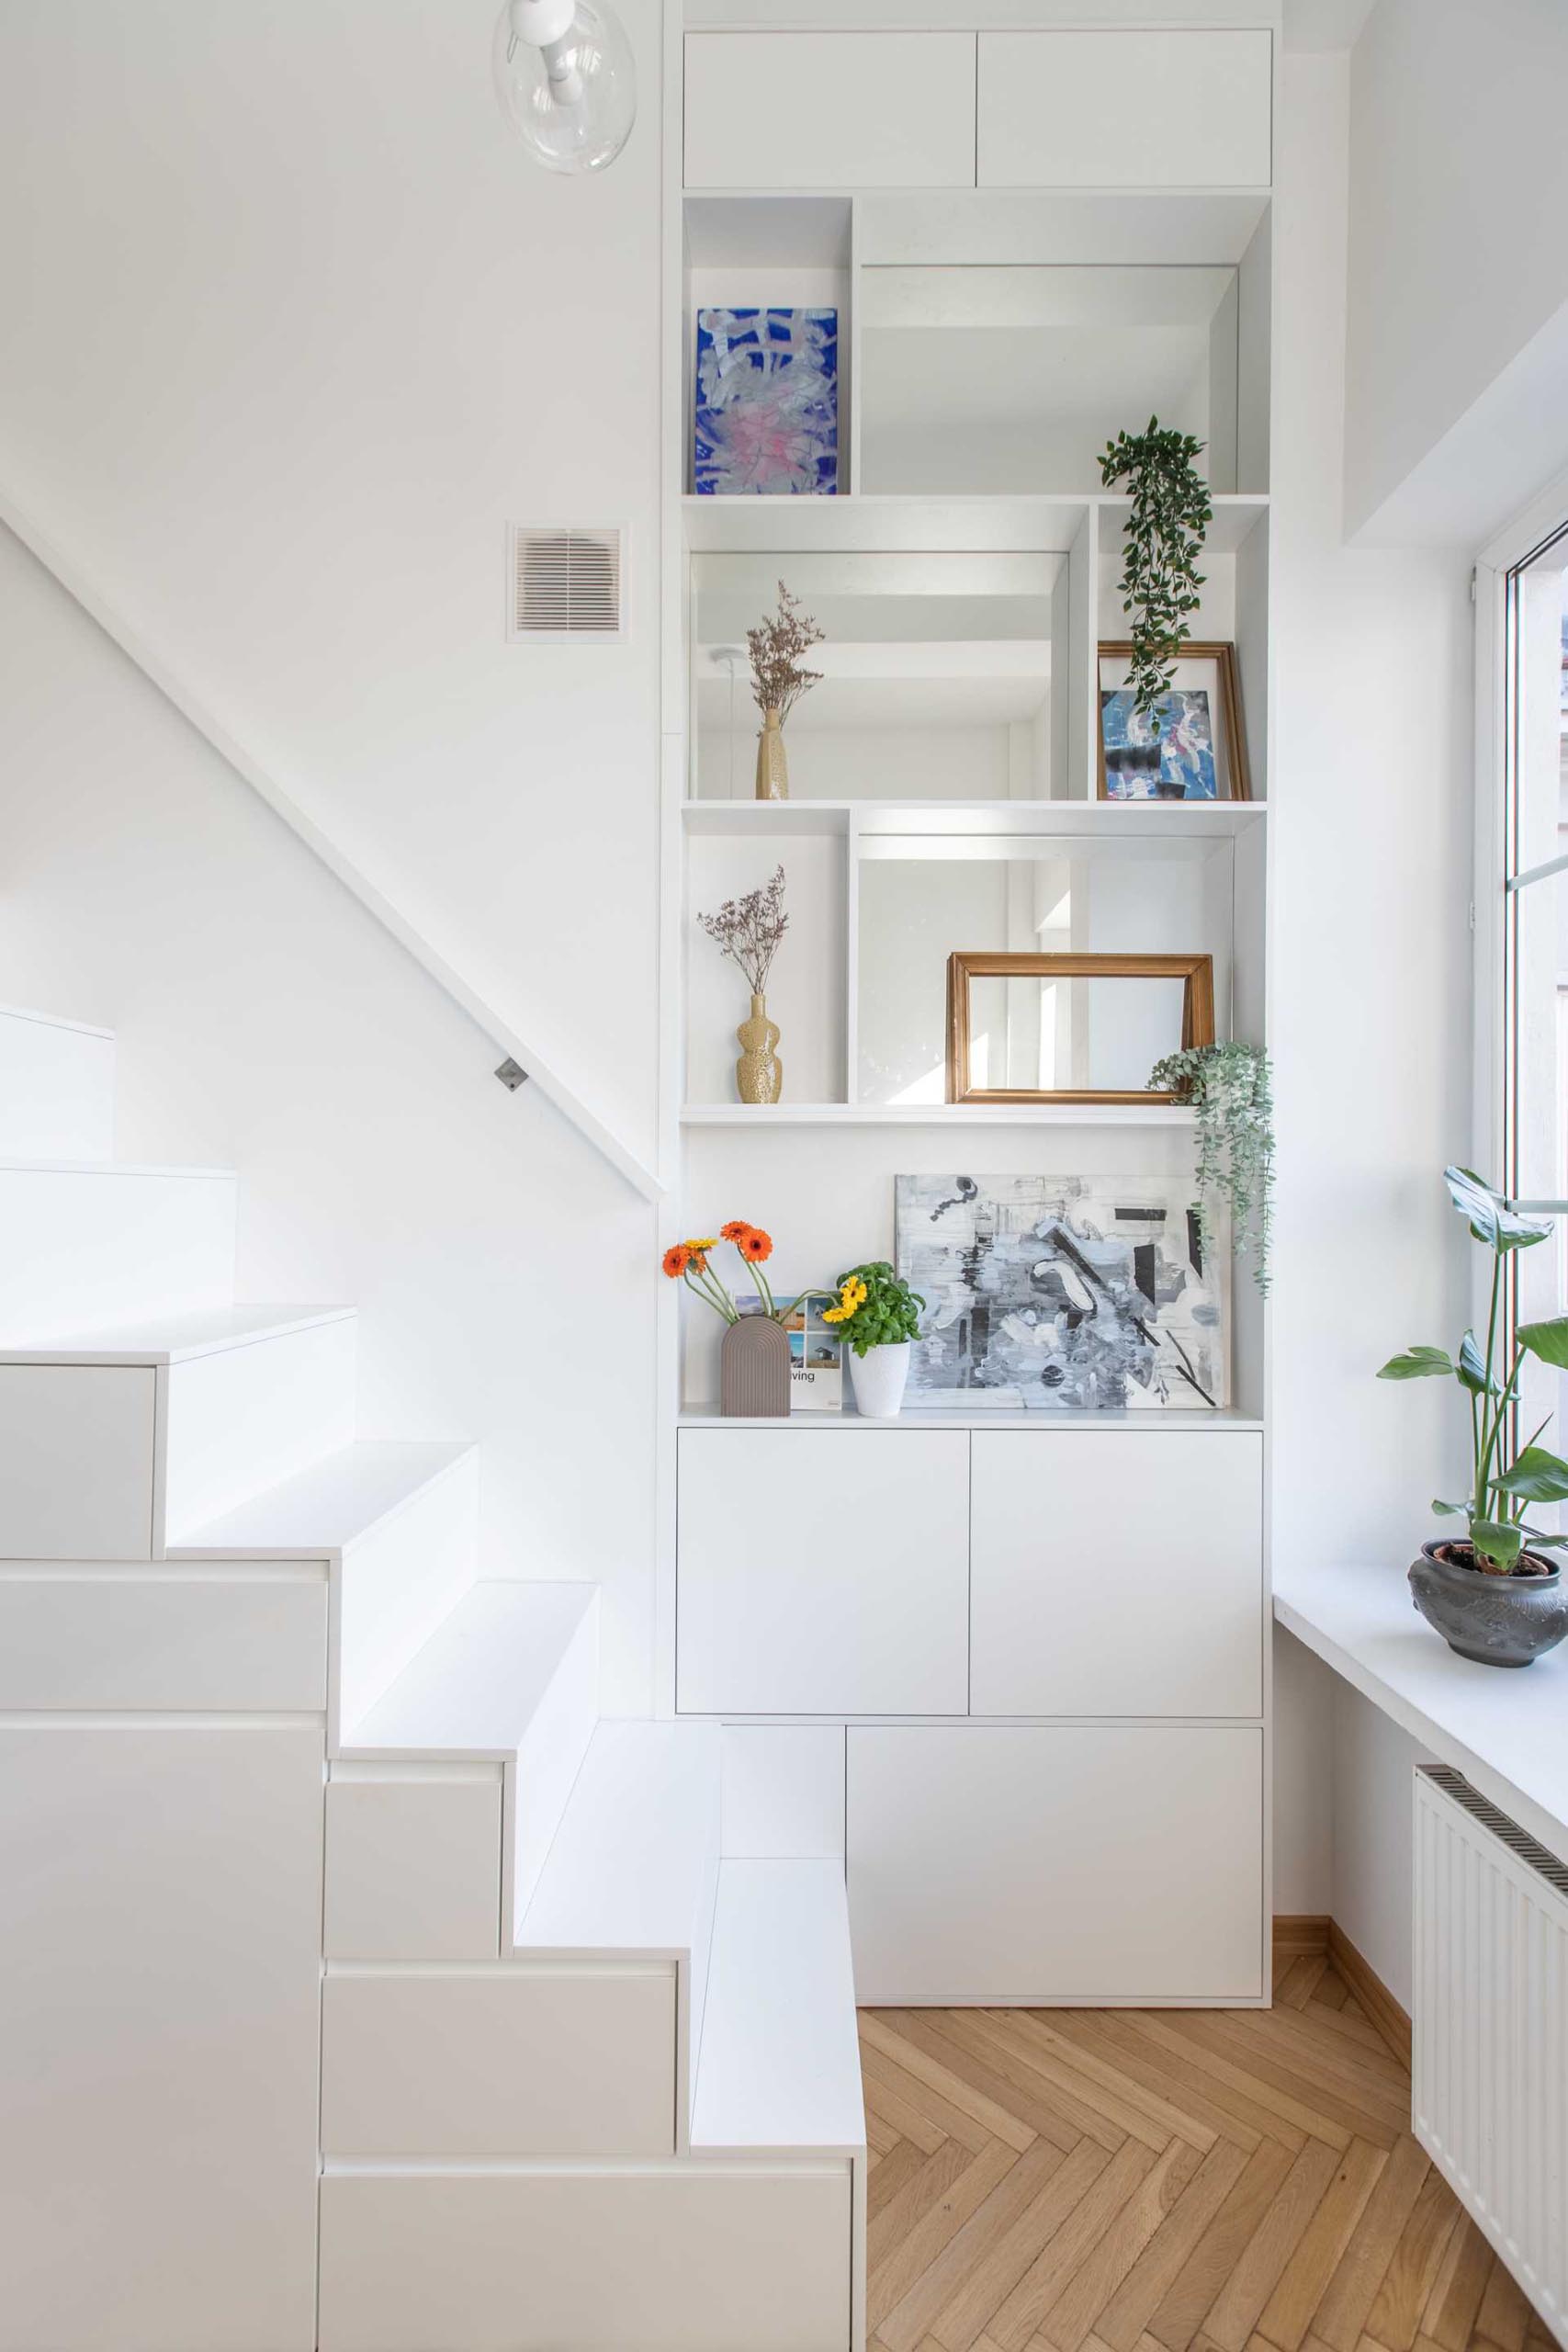 At the bottom of these stairs in a small apartment, there's a floor-to-ceiling shelving unit that includes storage and mirrors.